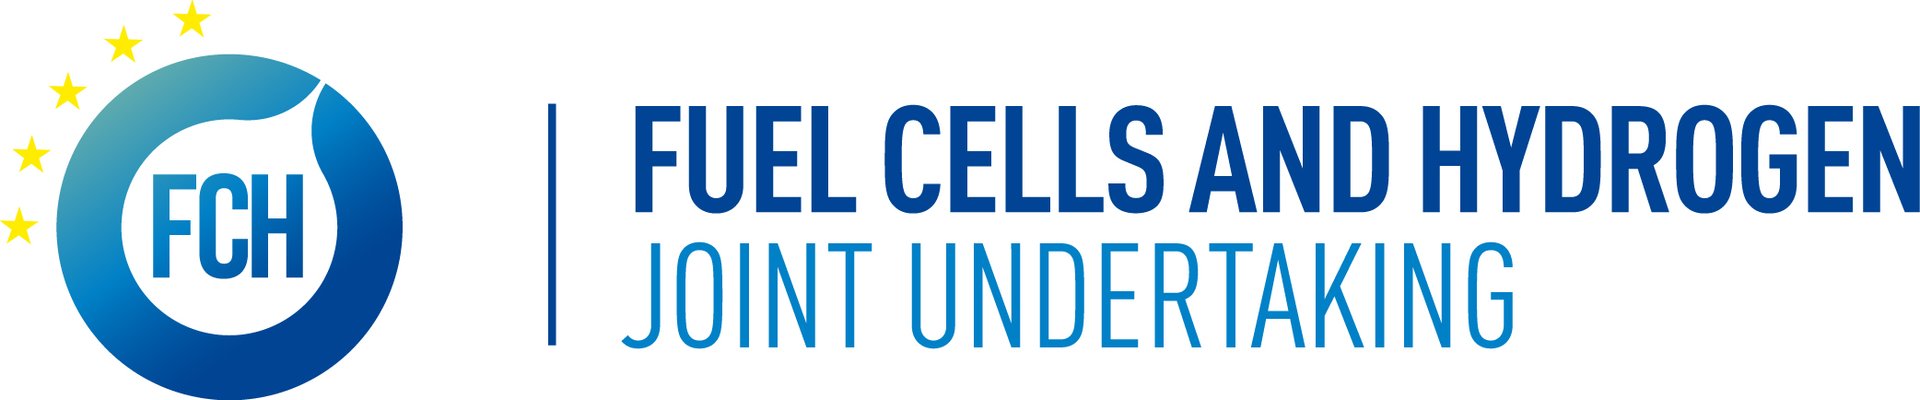 Afbeelding logo fuel cells and hydrogen